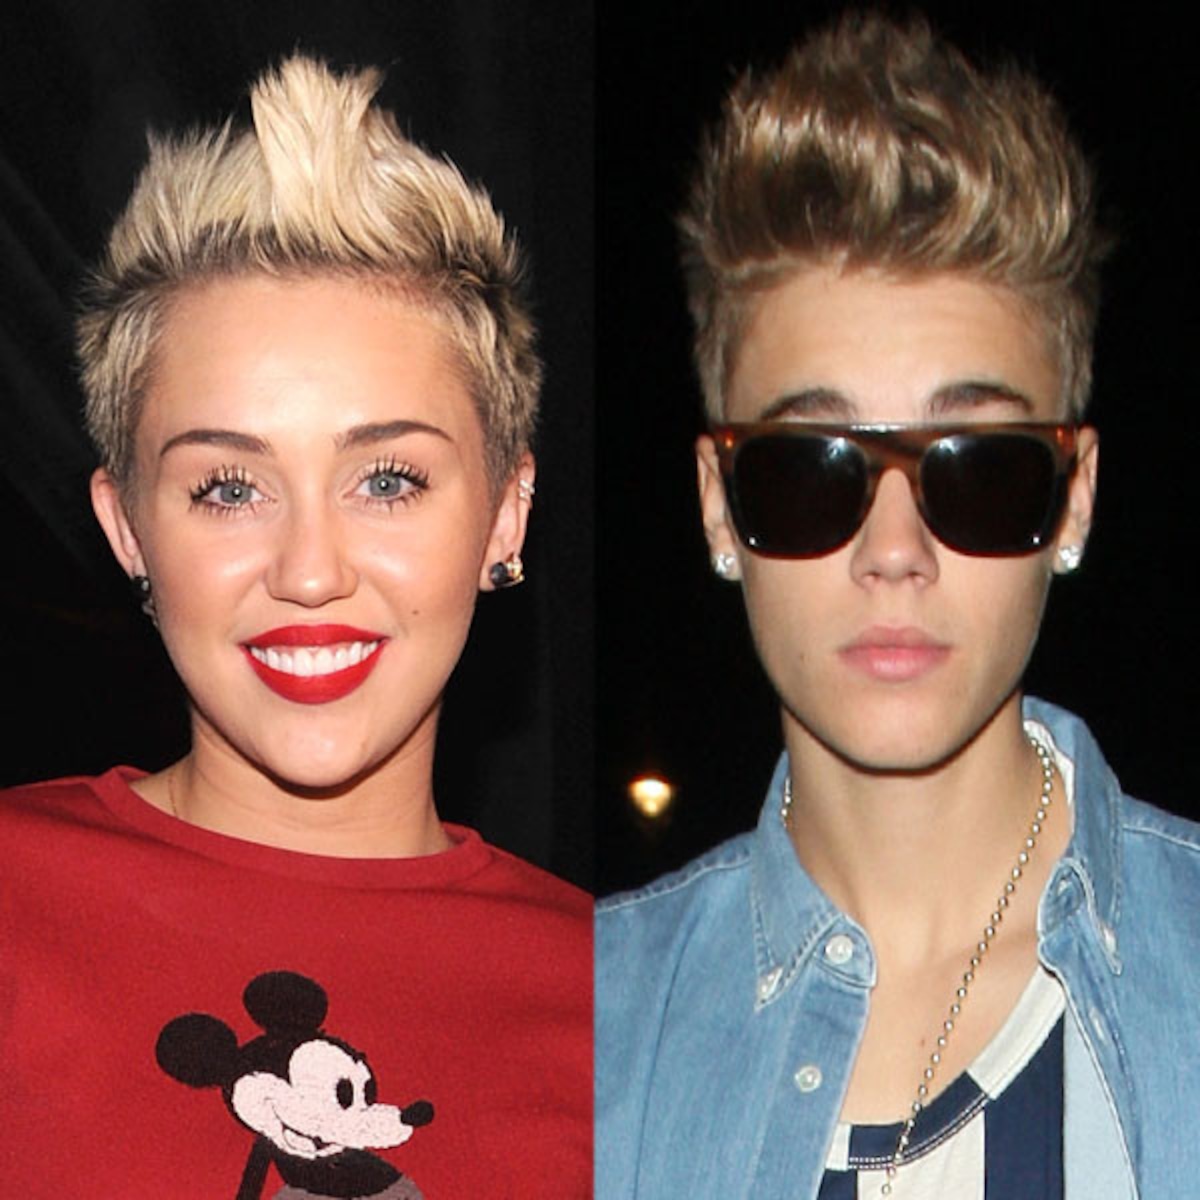 Who has more money miley cyrus and justin bieber?